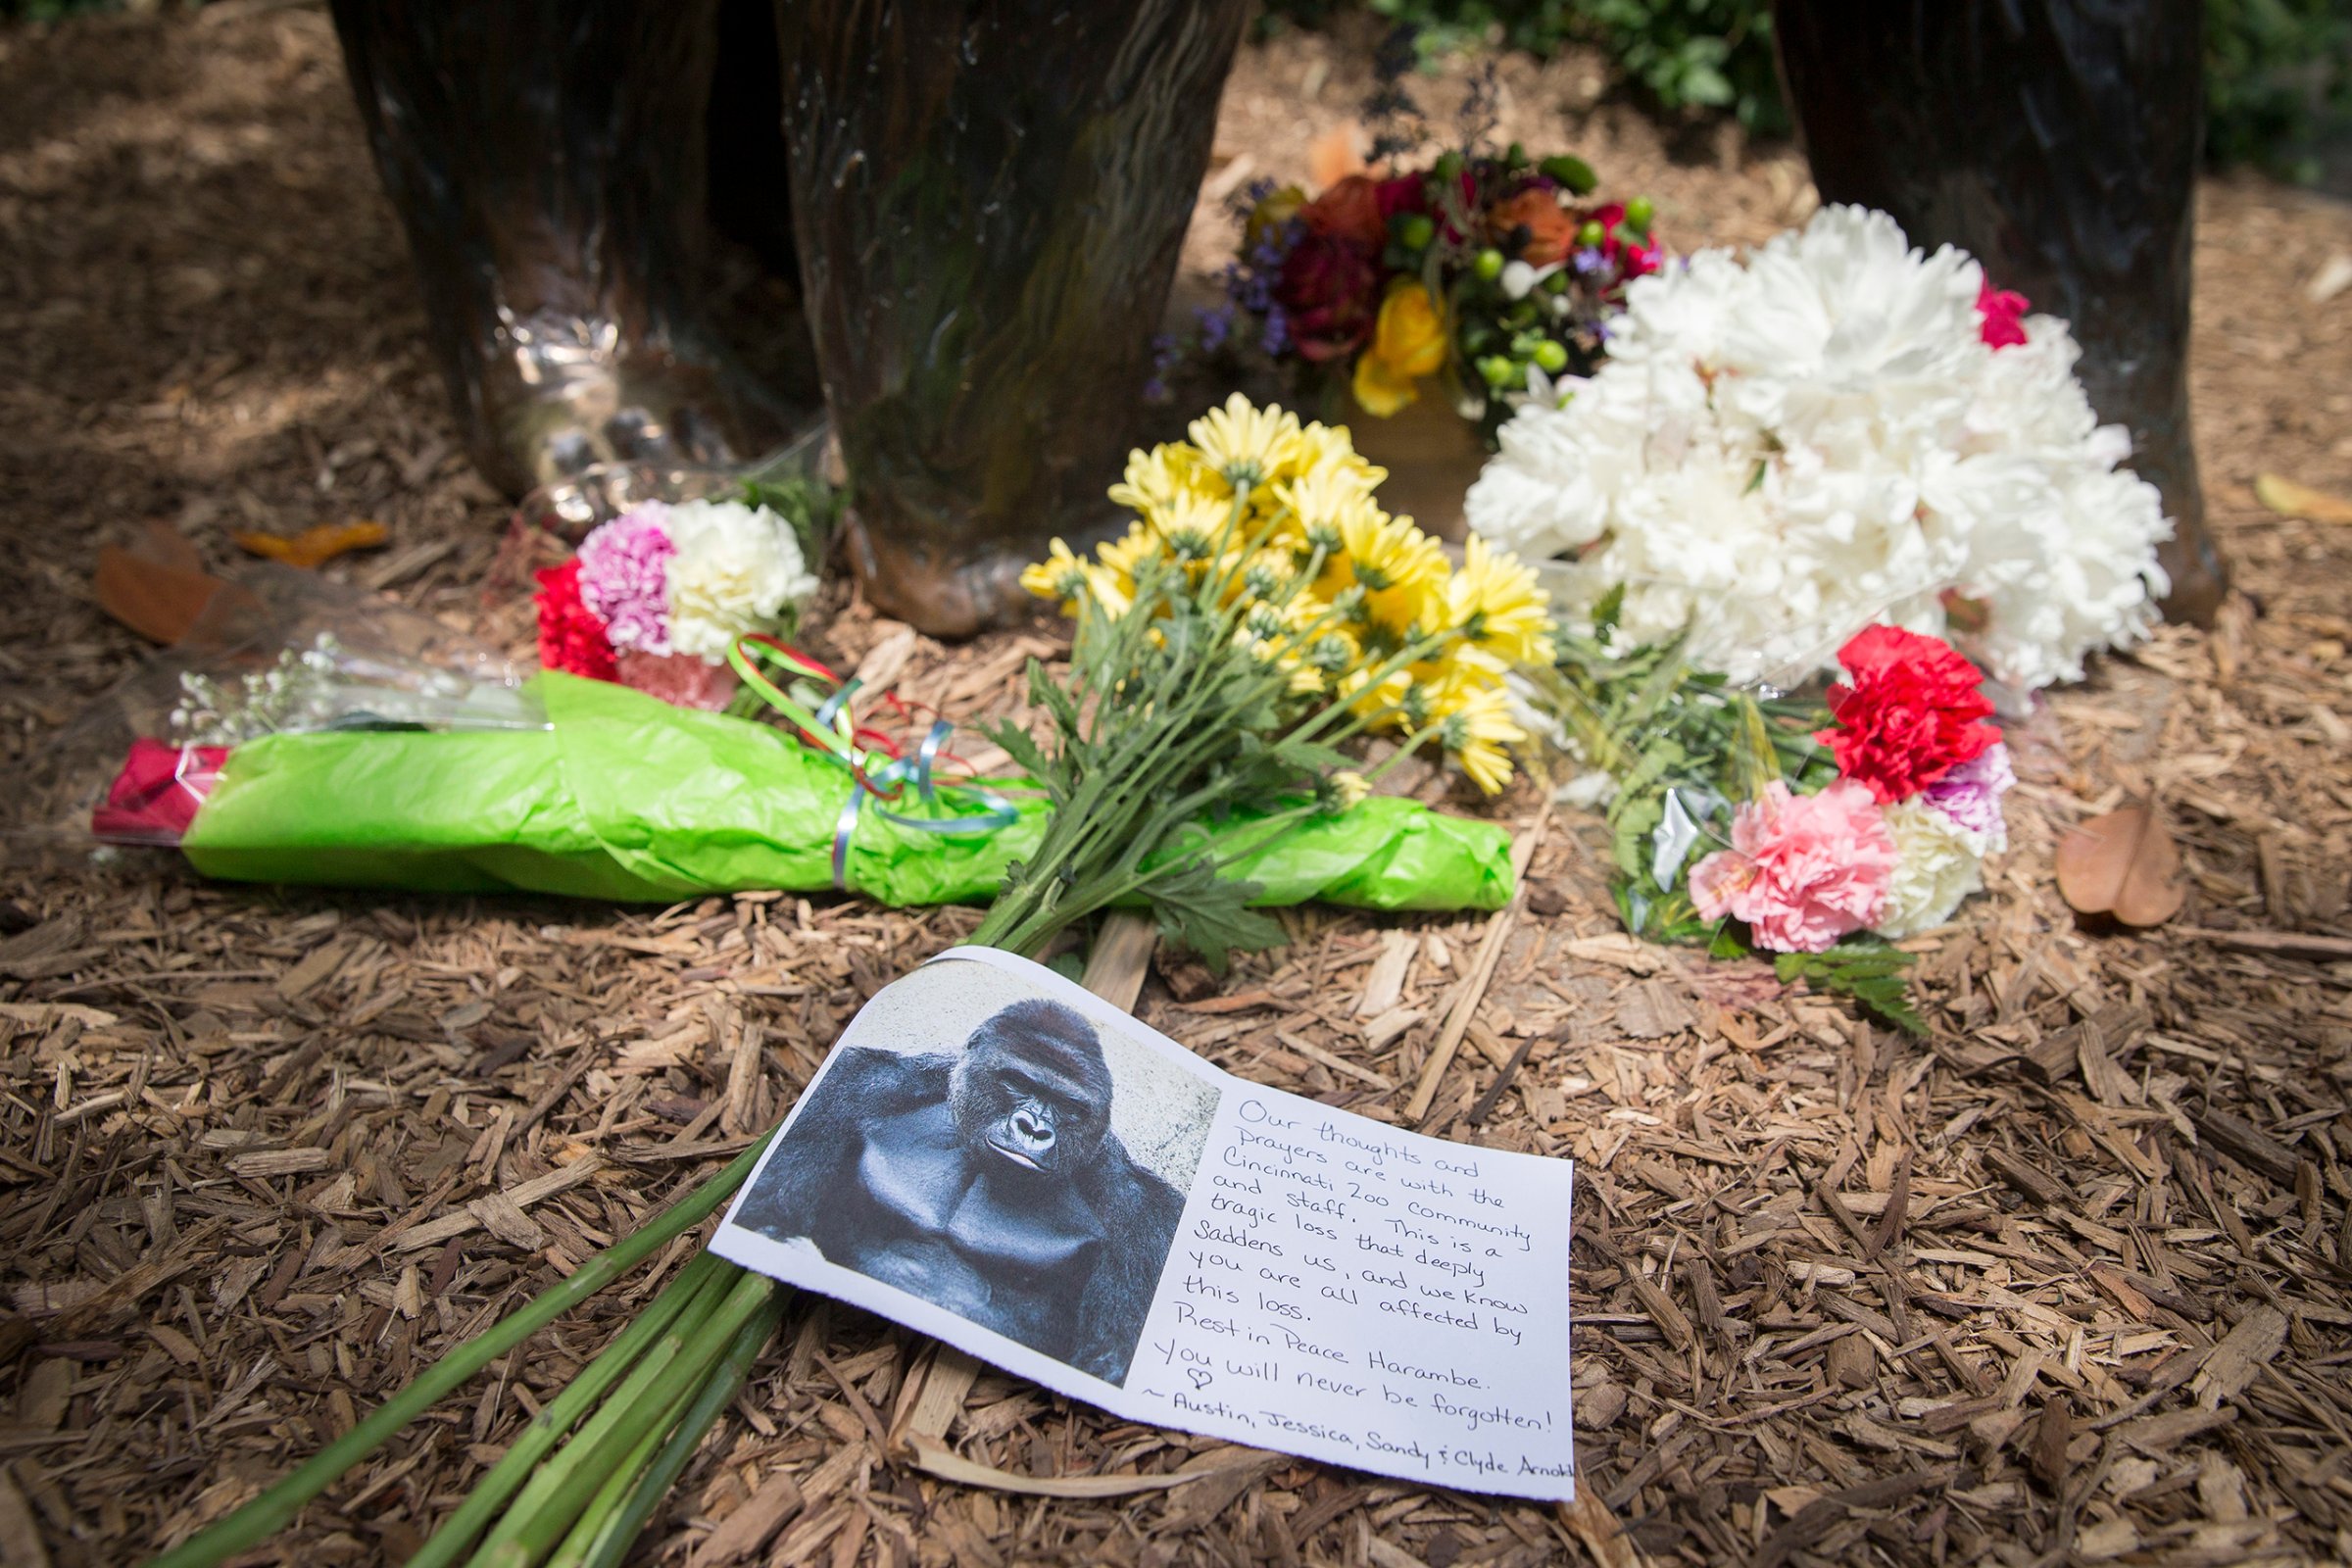 A sympathy card rests at the feet of a gorilla statue outside the Gorilla World exhibit at the Cincinnati Zoo & Botanical Garden, May 29, 2016.